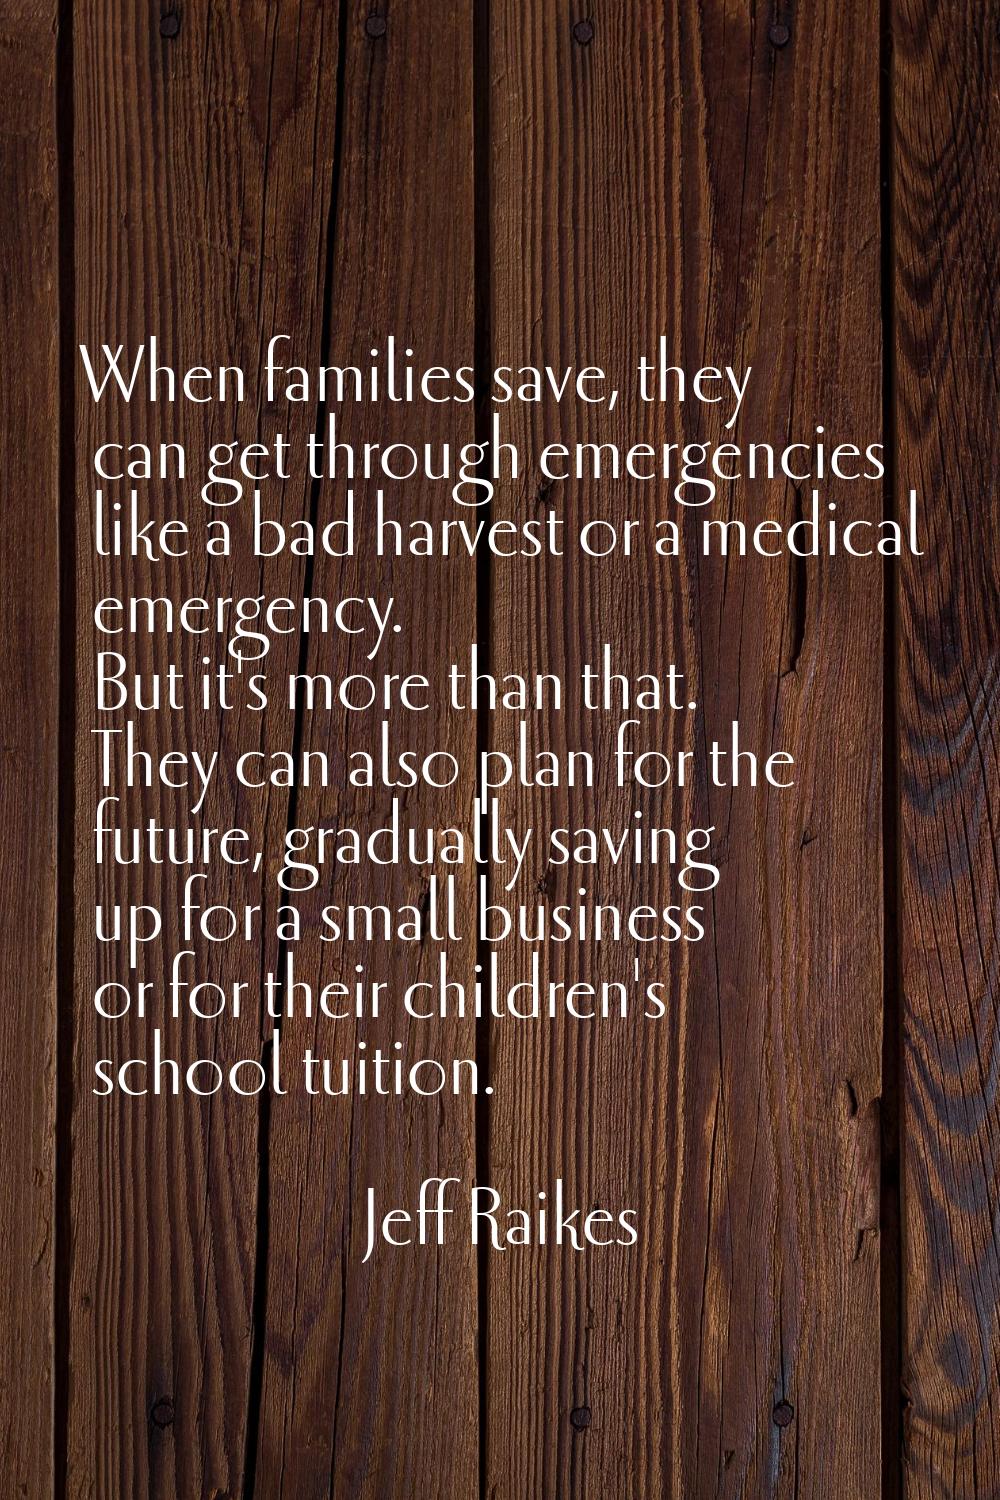 When families save, they can get through emergencies like a bad harvest or a medical emergency. But